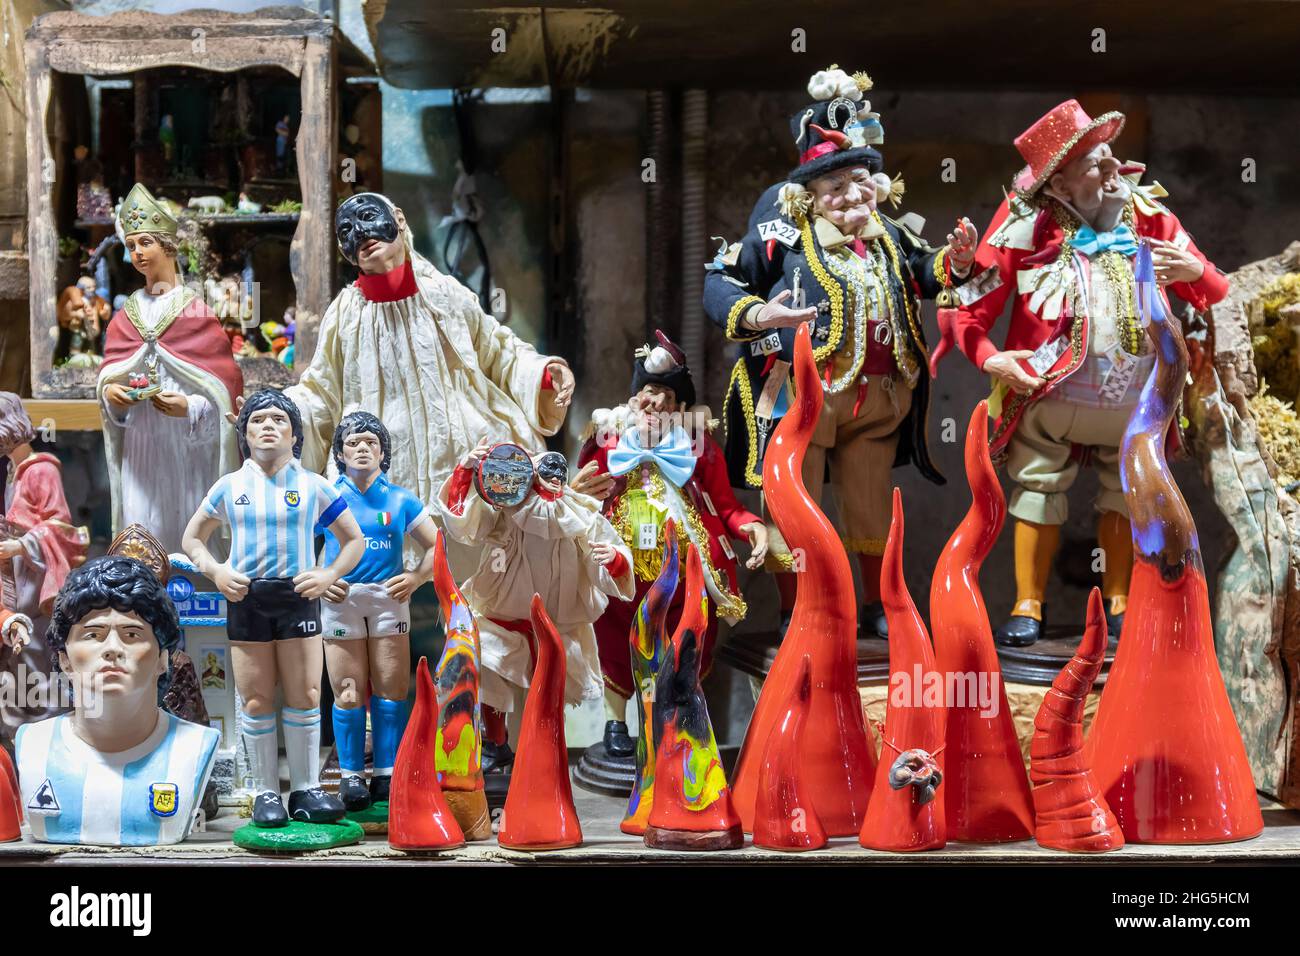 Naples, Italy - December 24, 2021: Hand painted terracotta statuettes, representing famous people, for sale in San Gregorio Armeno, the famous street Stock Photo